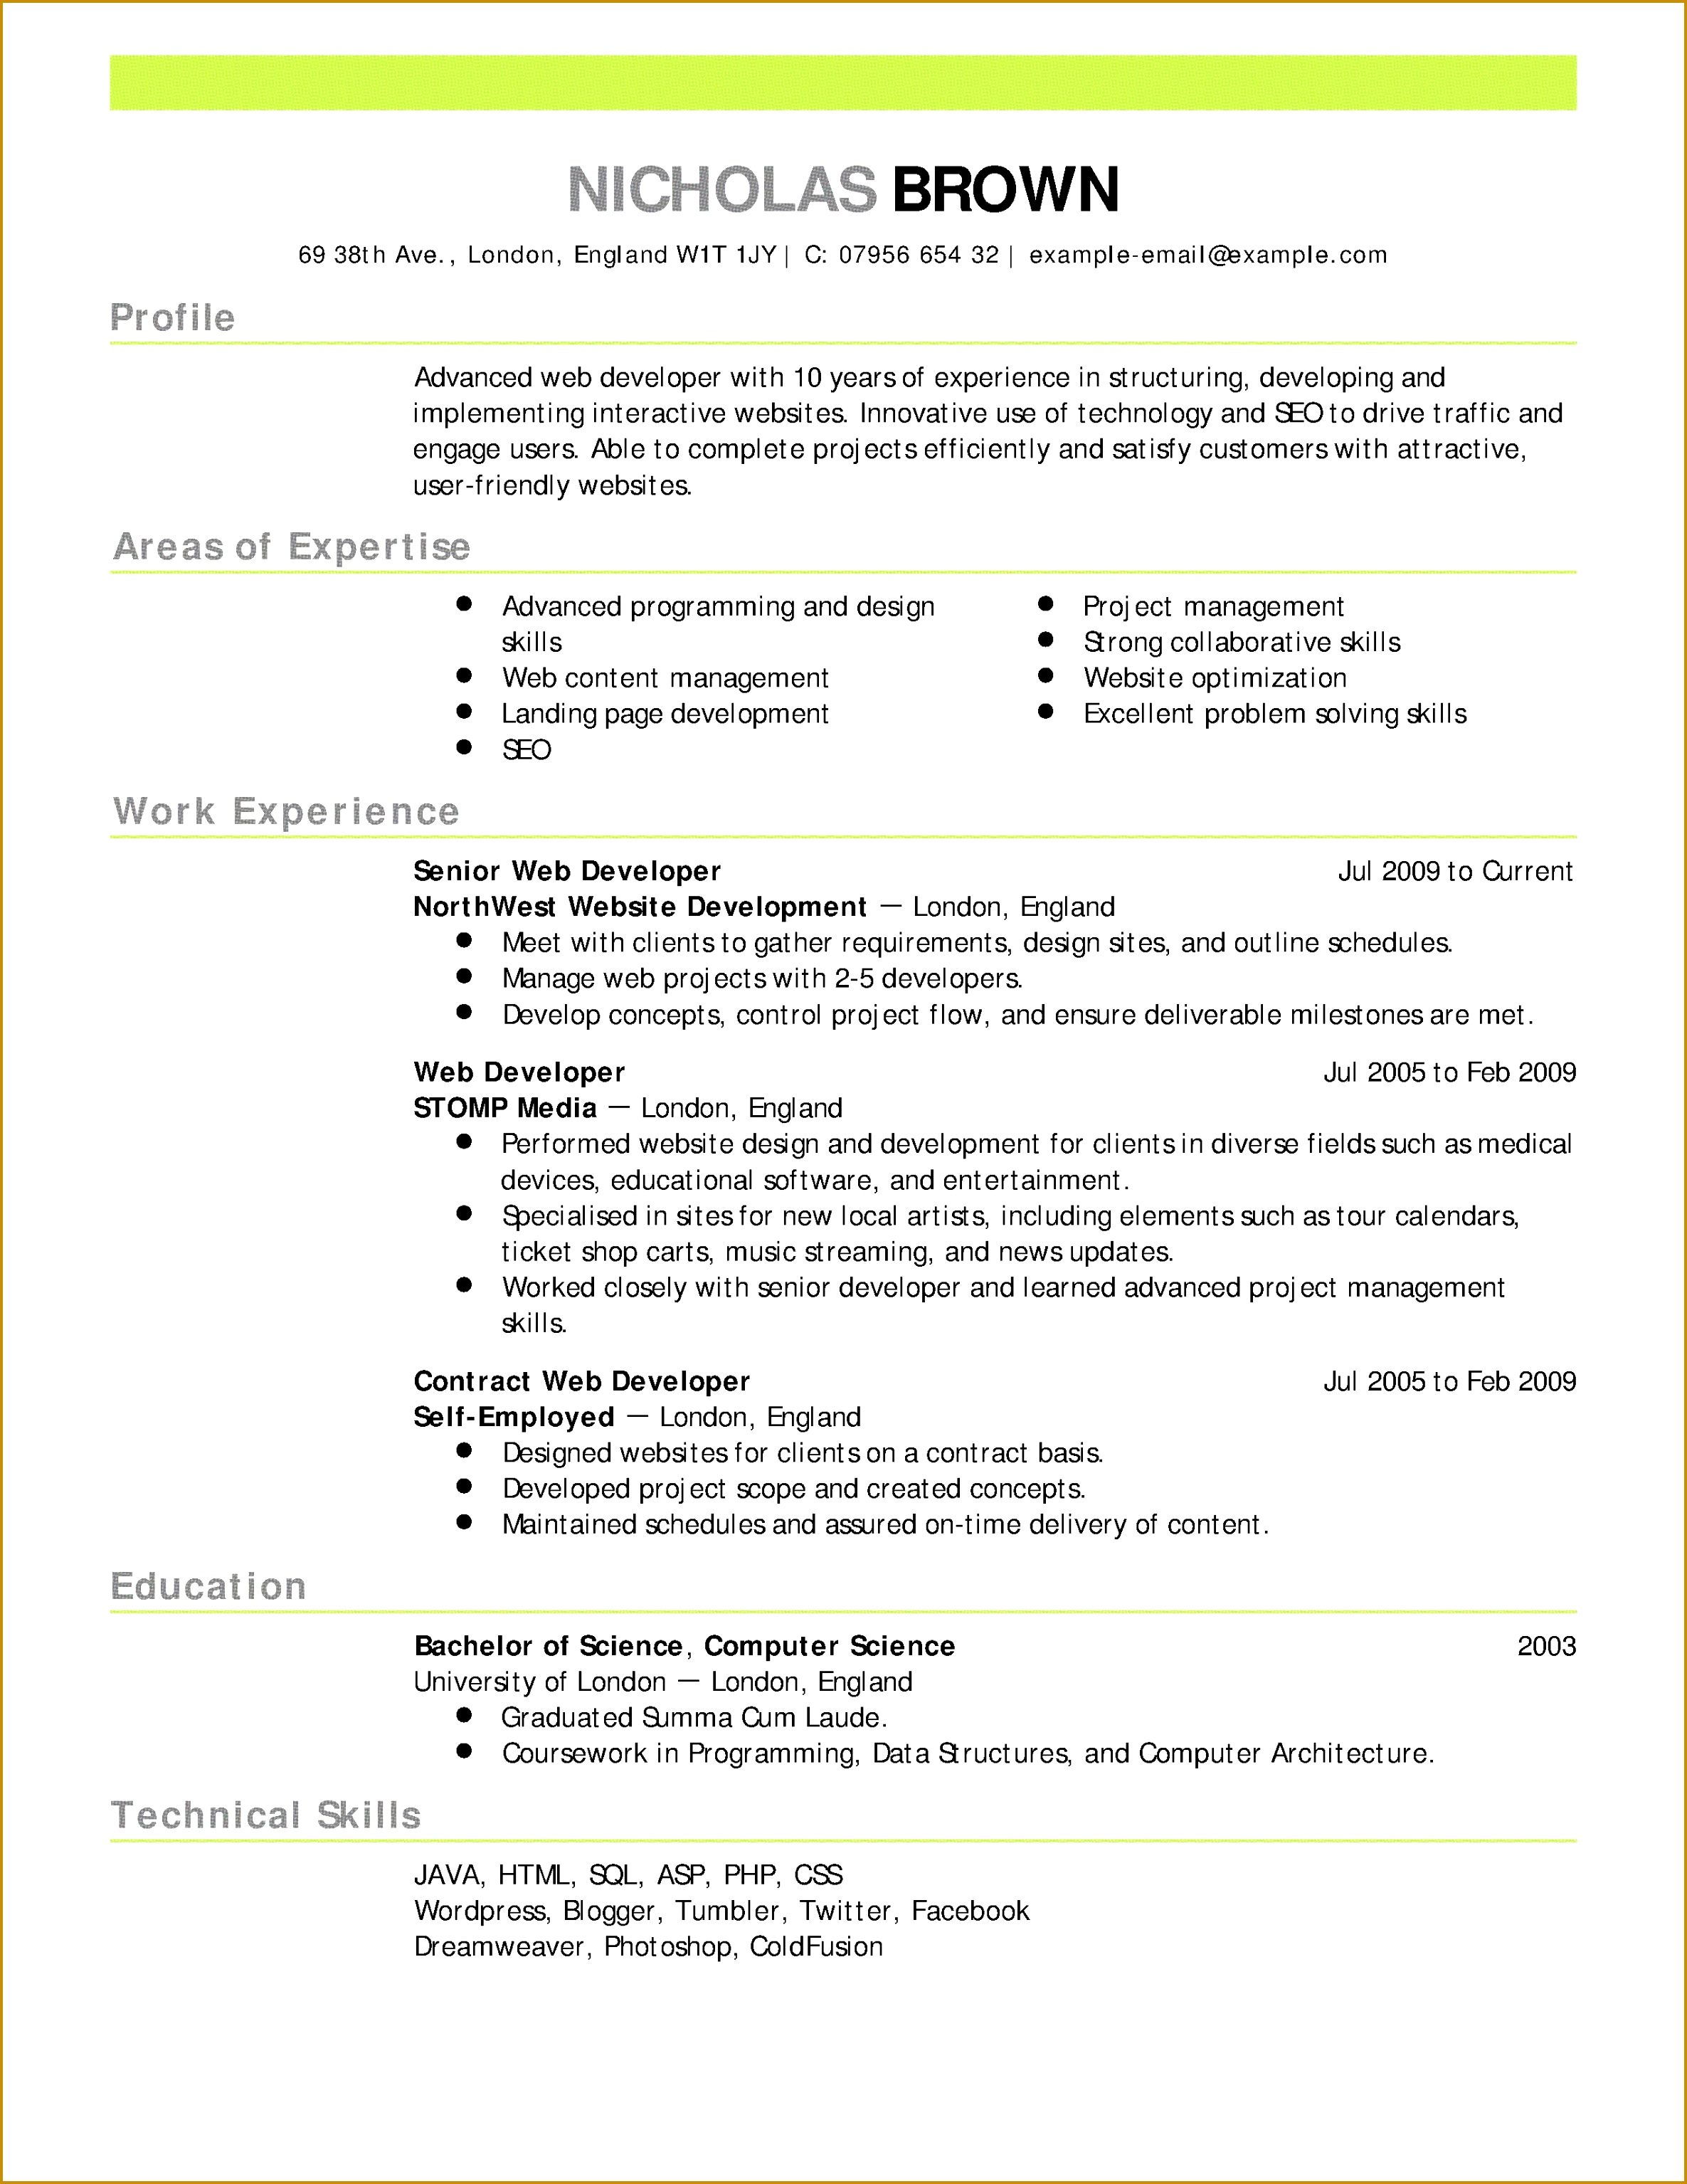 Teaching Resume Template Lovely Professional Job Resume Template Od Specialist Cover Letter Lead 30692371